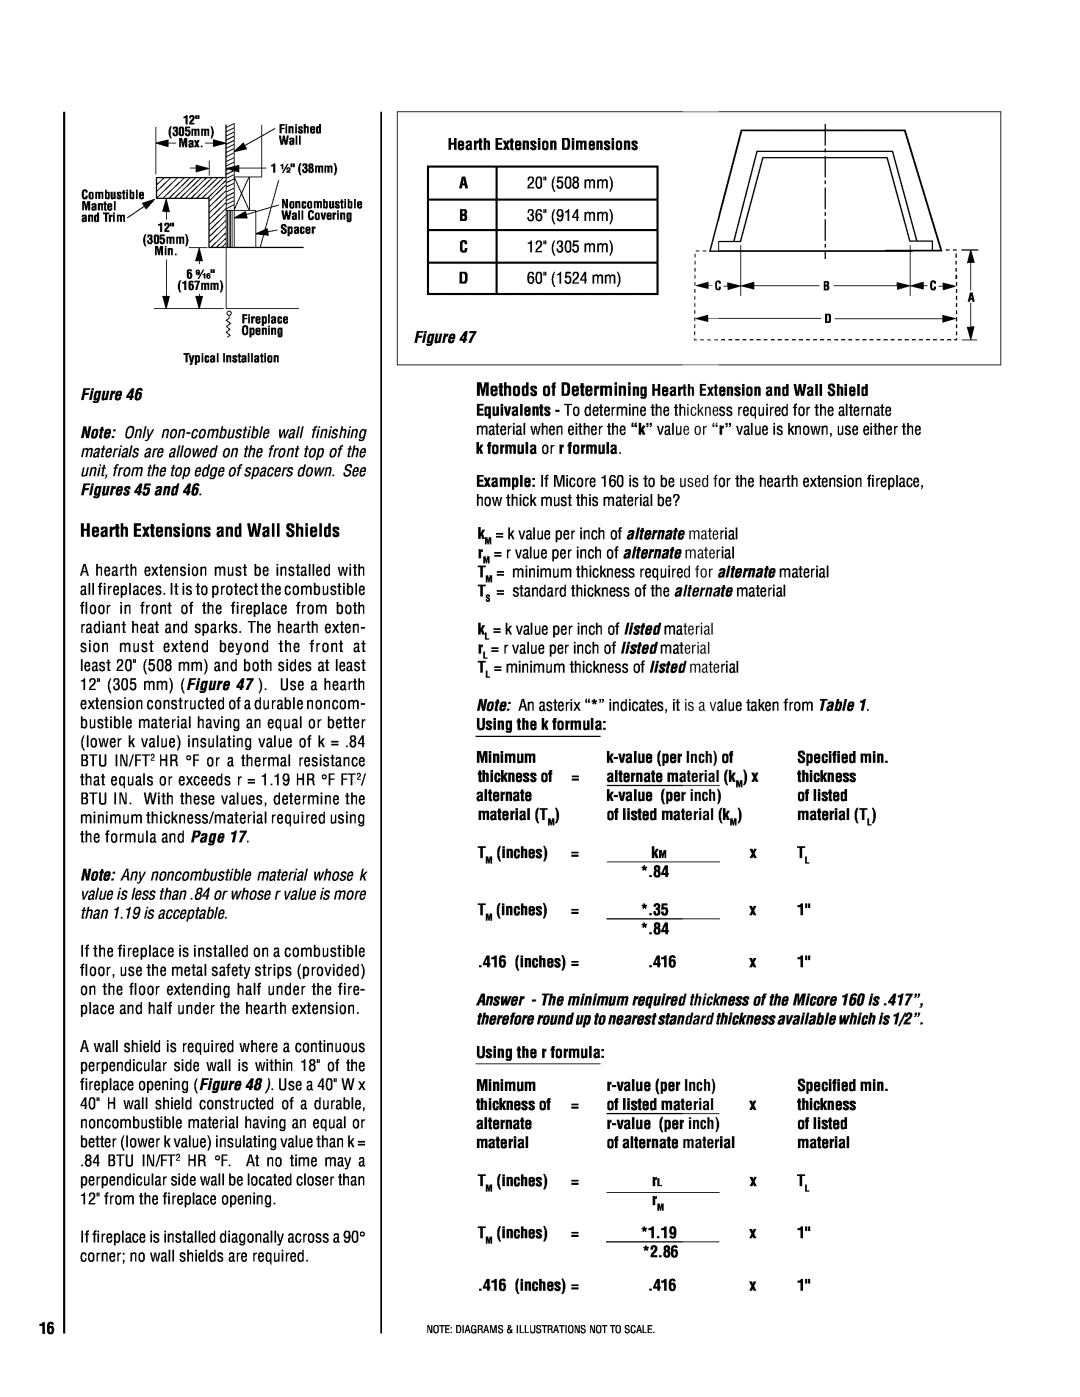 Lucent Technologies TM-4500 installation instructions Hearth Extensions and Wall Shields 